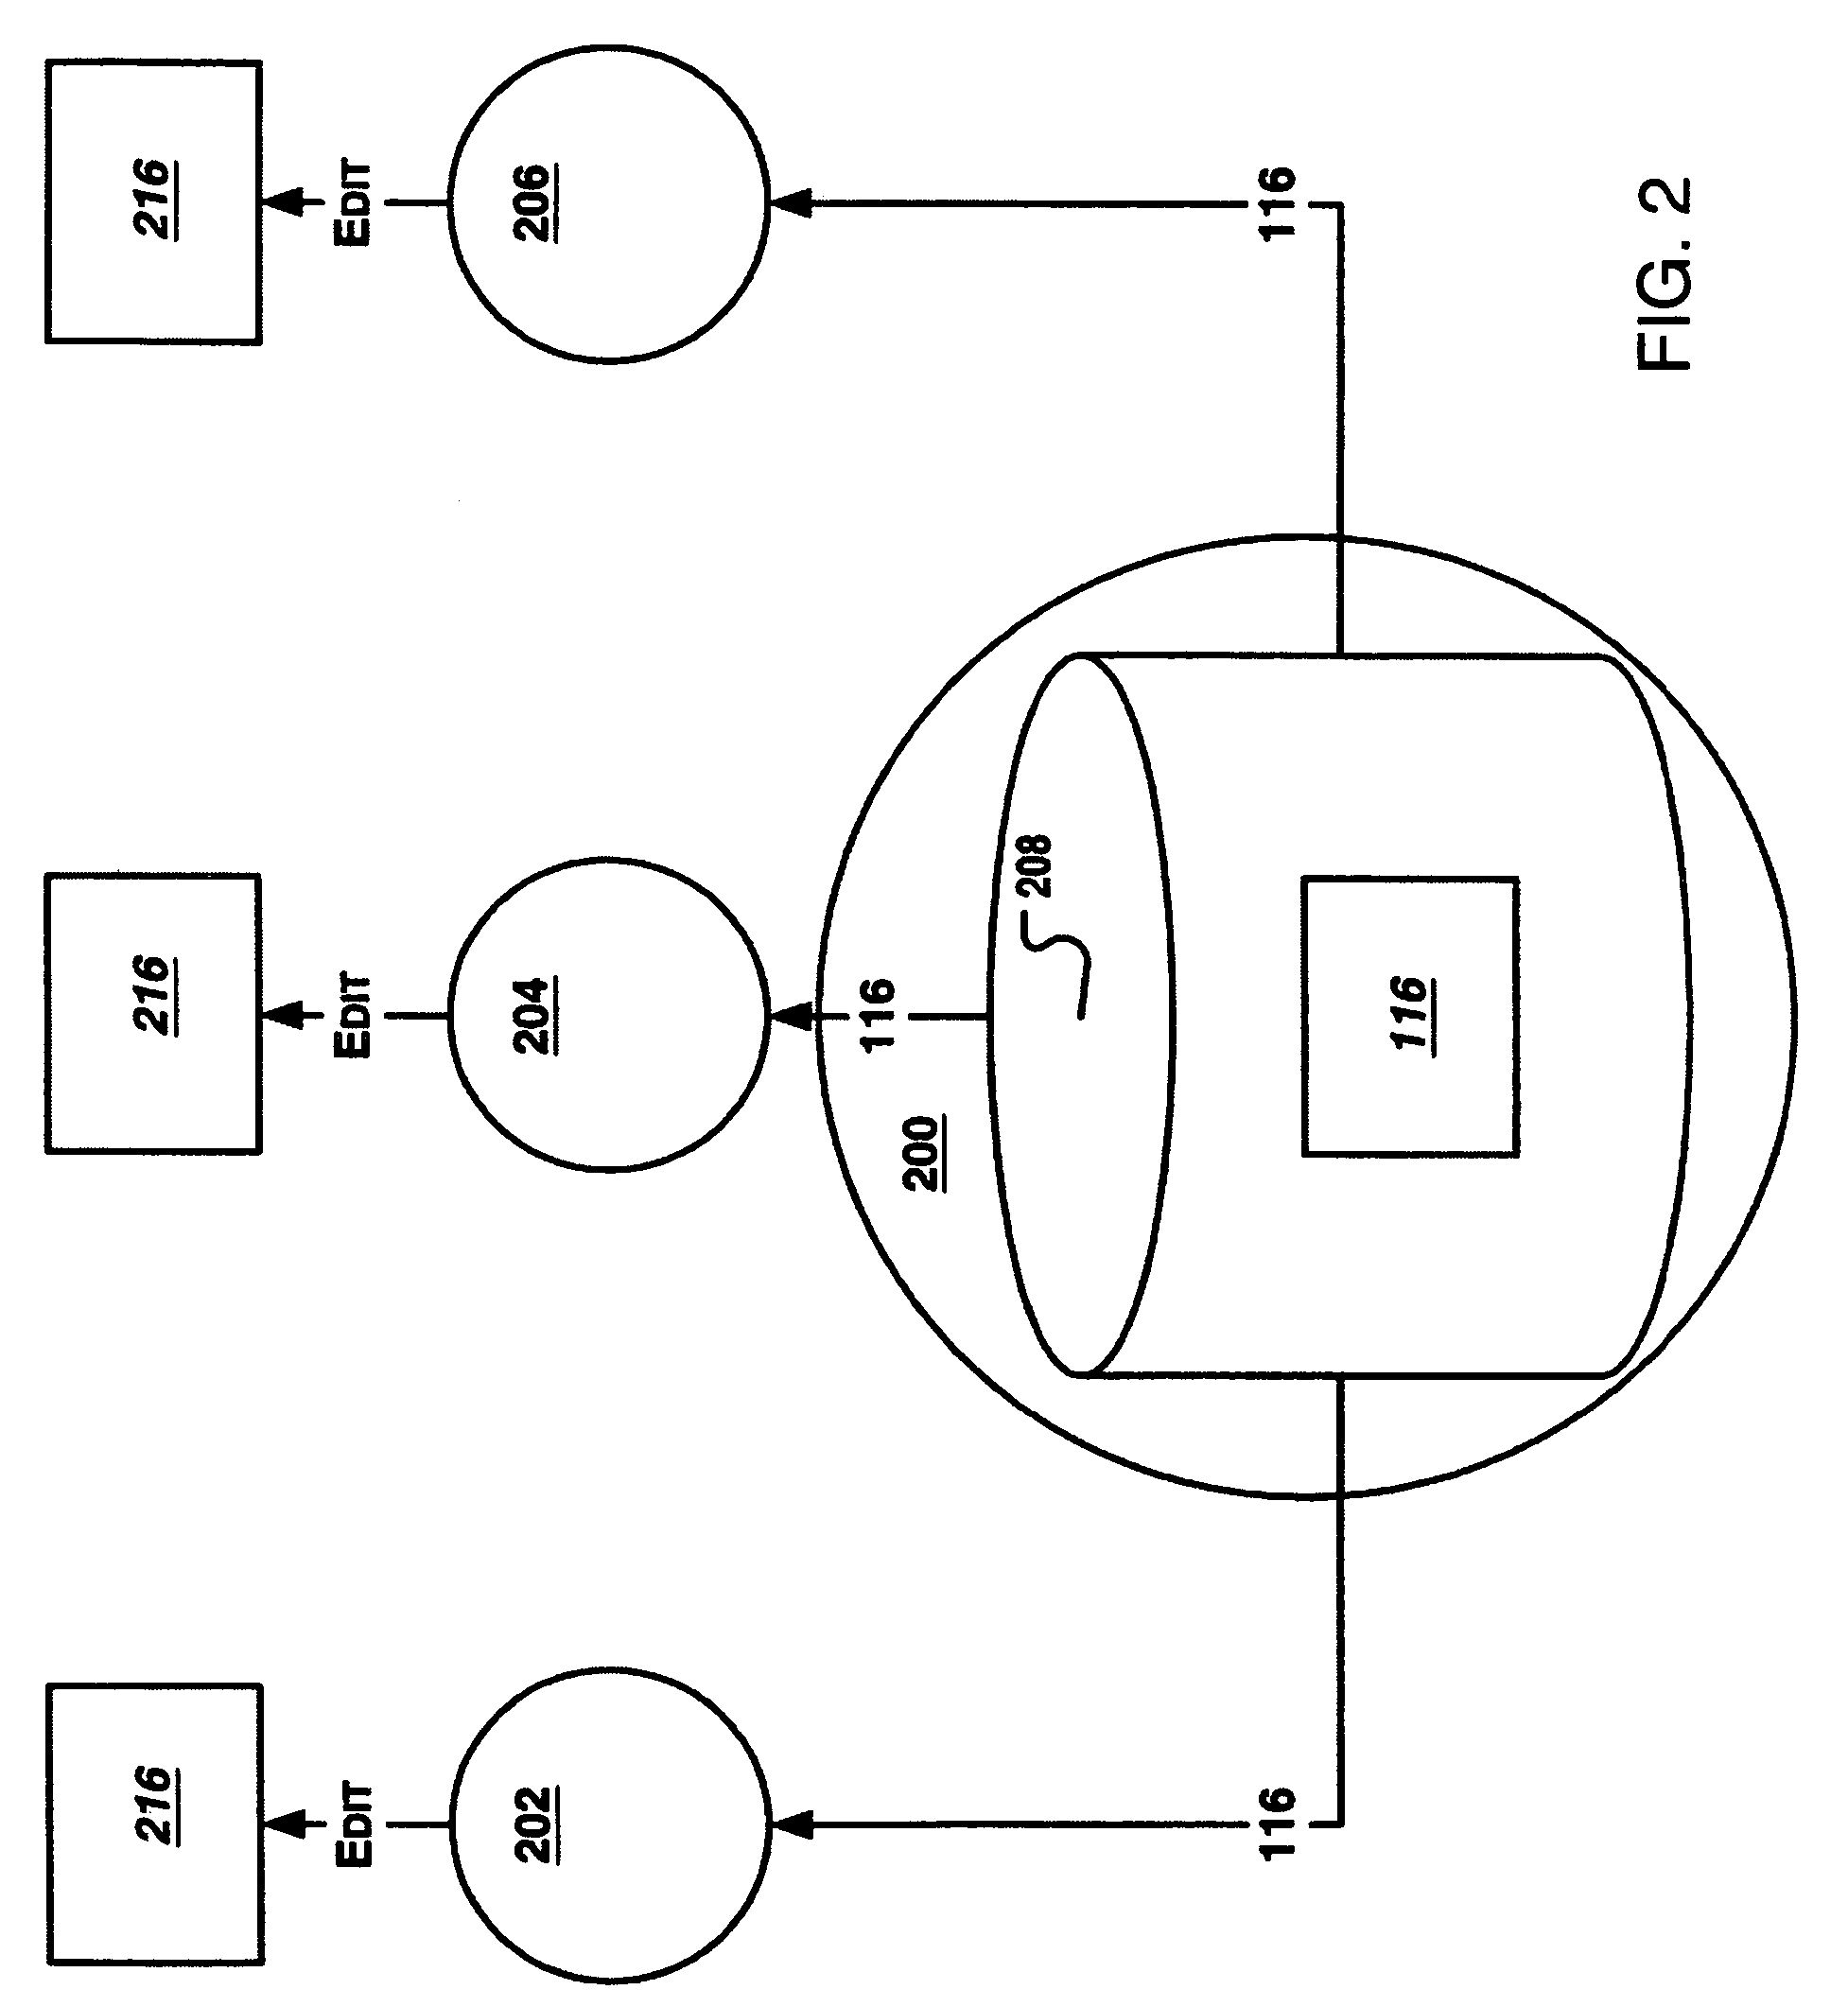 Protection boundaries in a parallel printed circuit board design environment